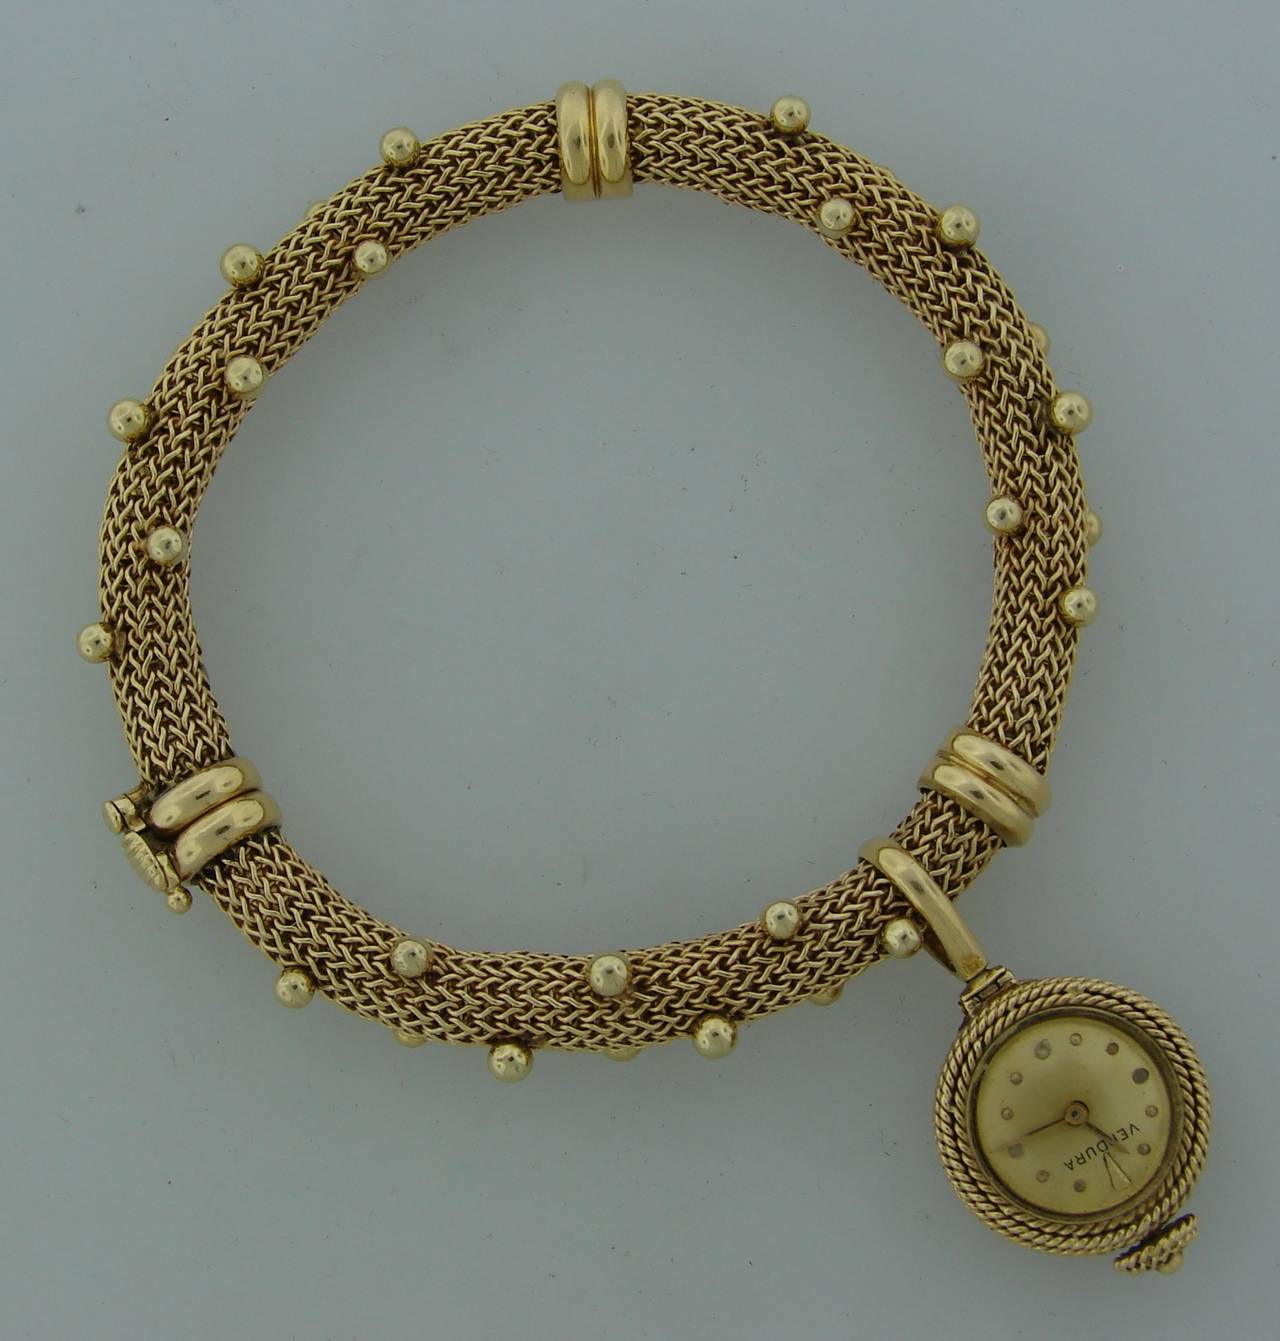 A signature Verdura piece - a prototype of well-known Beehive pendant watch. Created in the 1960's. Made of 18k yellow gold.
The bracelet fits up to 7.25